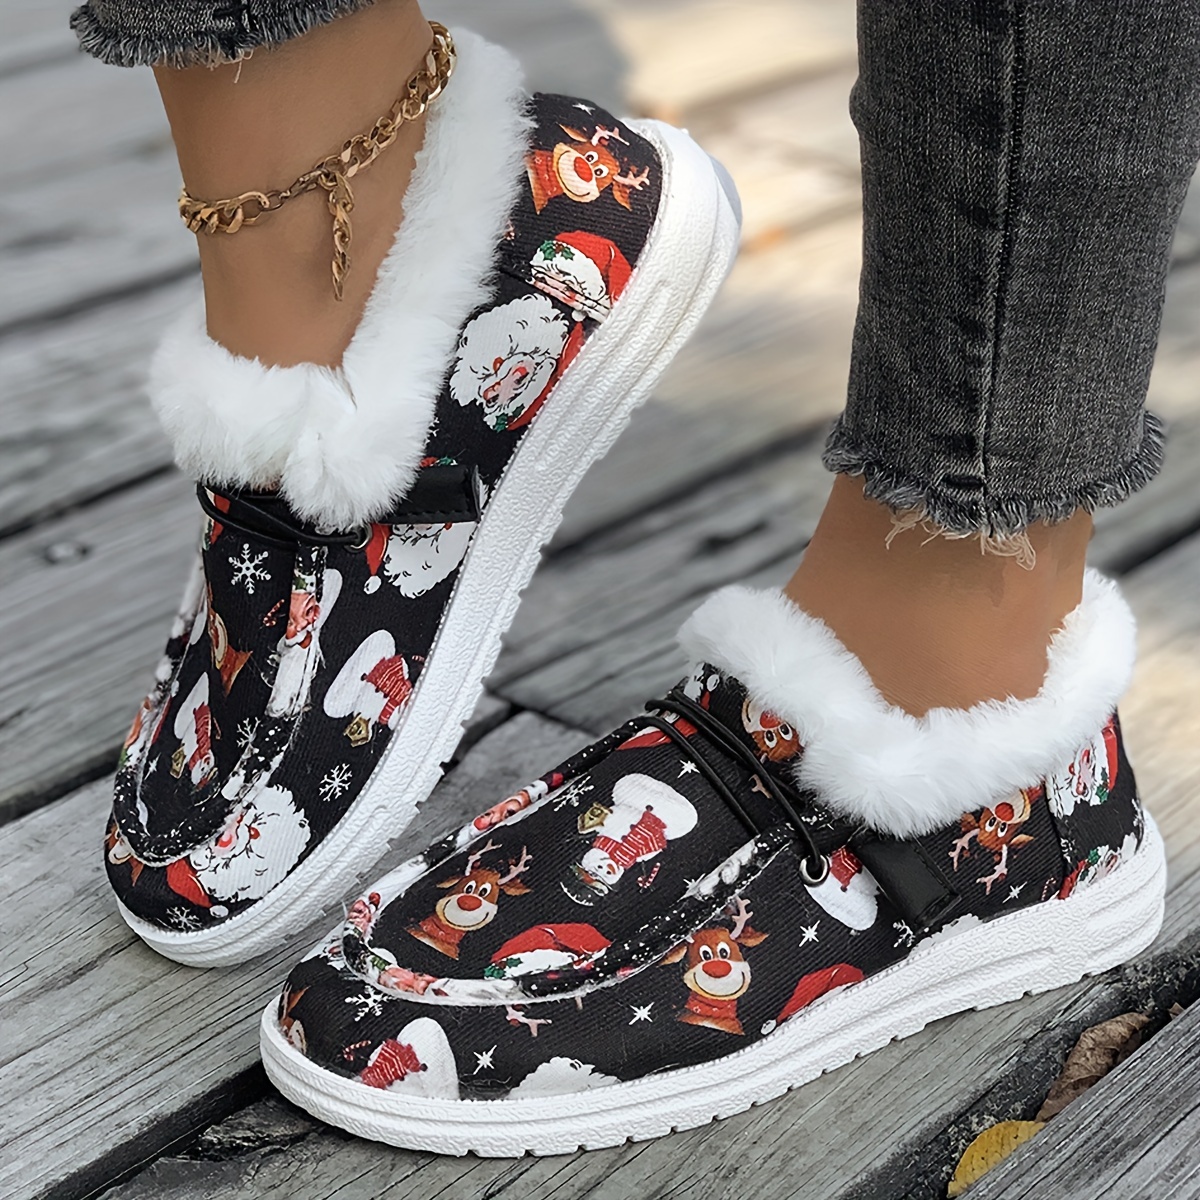 Women's Fashion Christmas Style Snow Boots, The Upper Is Decorated With  Christmas Snowman Cartoon Patterns, Plus Plush Comfort And Warmth